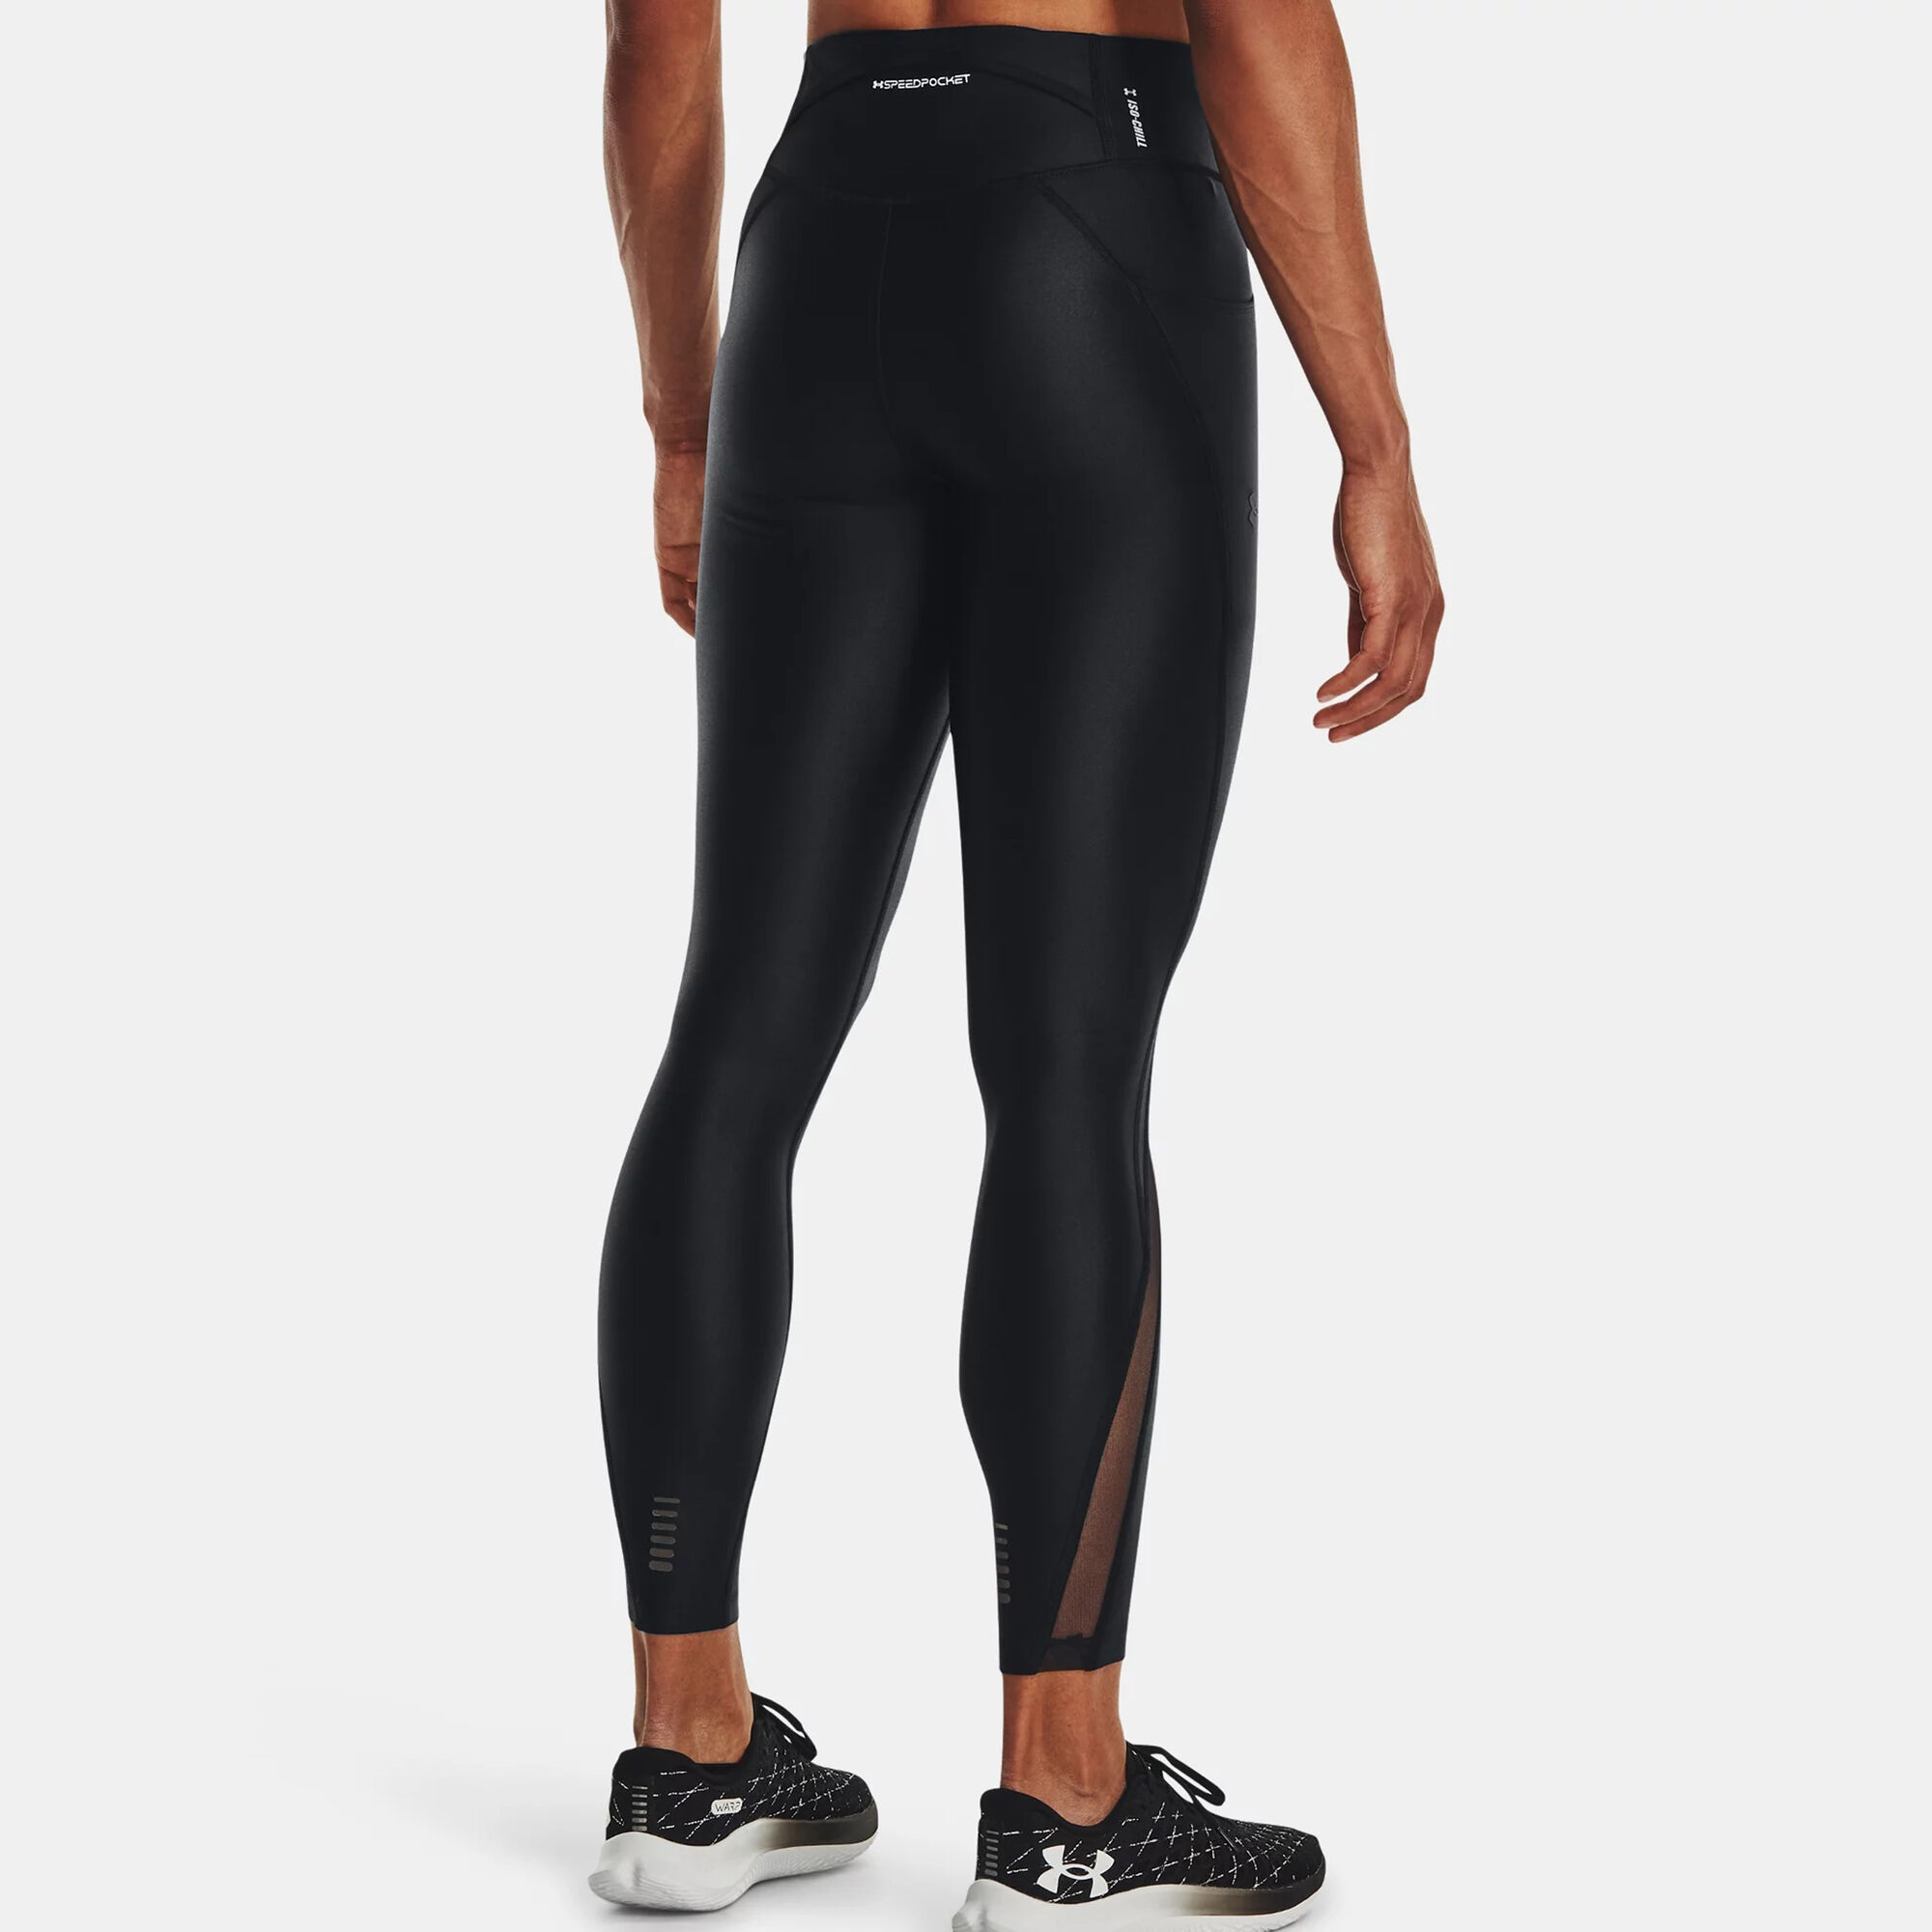 Buy Under Armour Fly Fast Elite IsoChill Ankle Tight Women Black online